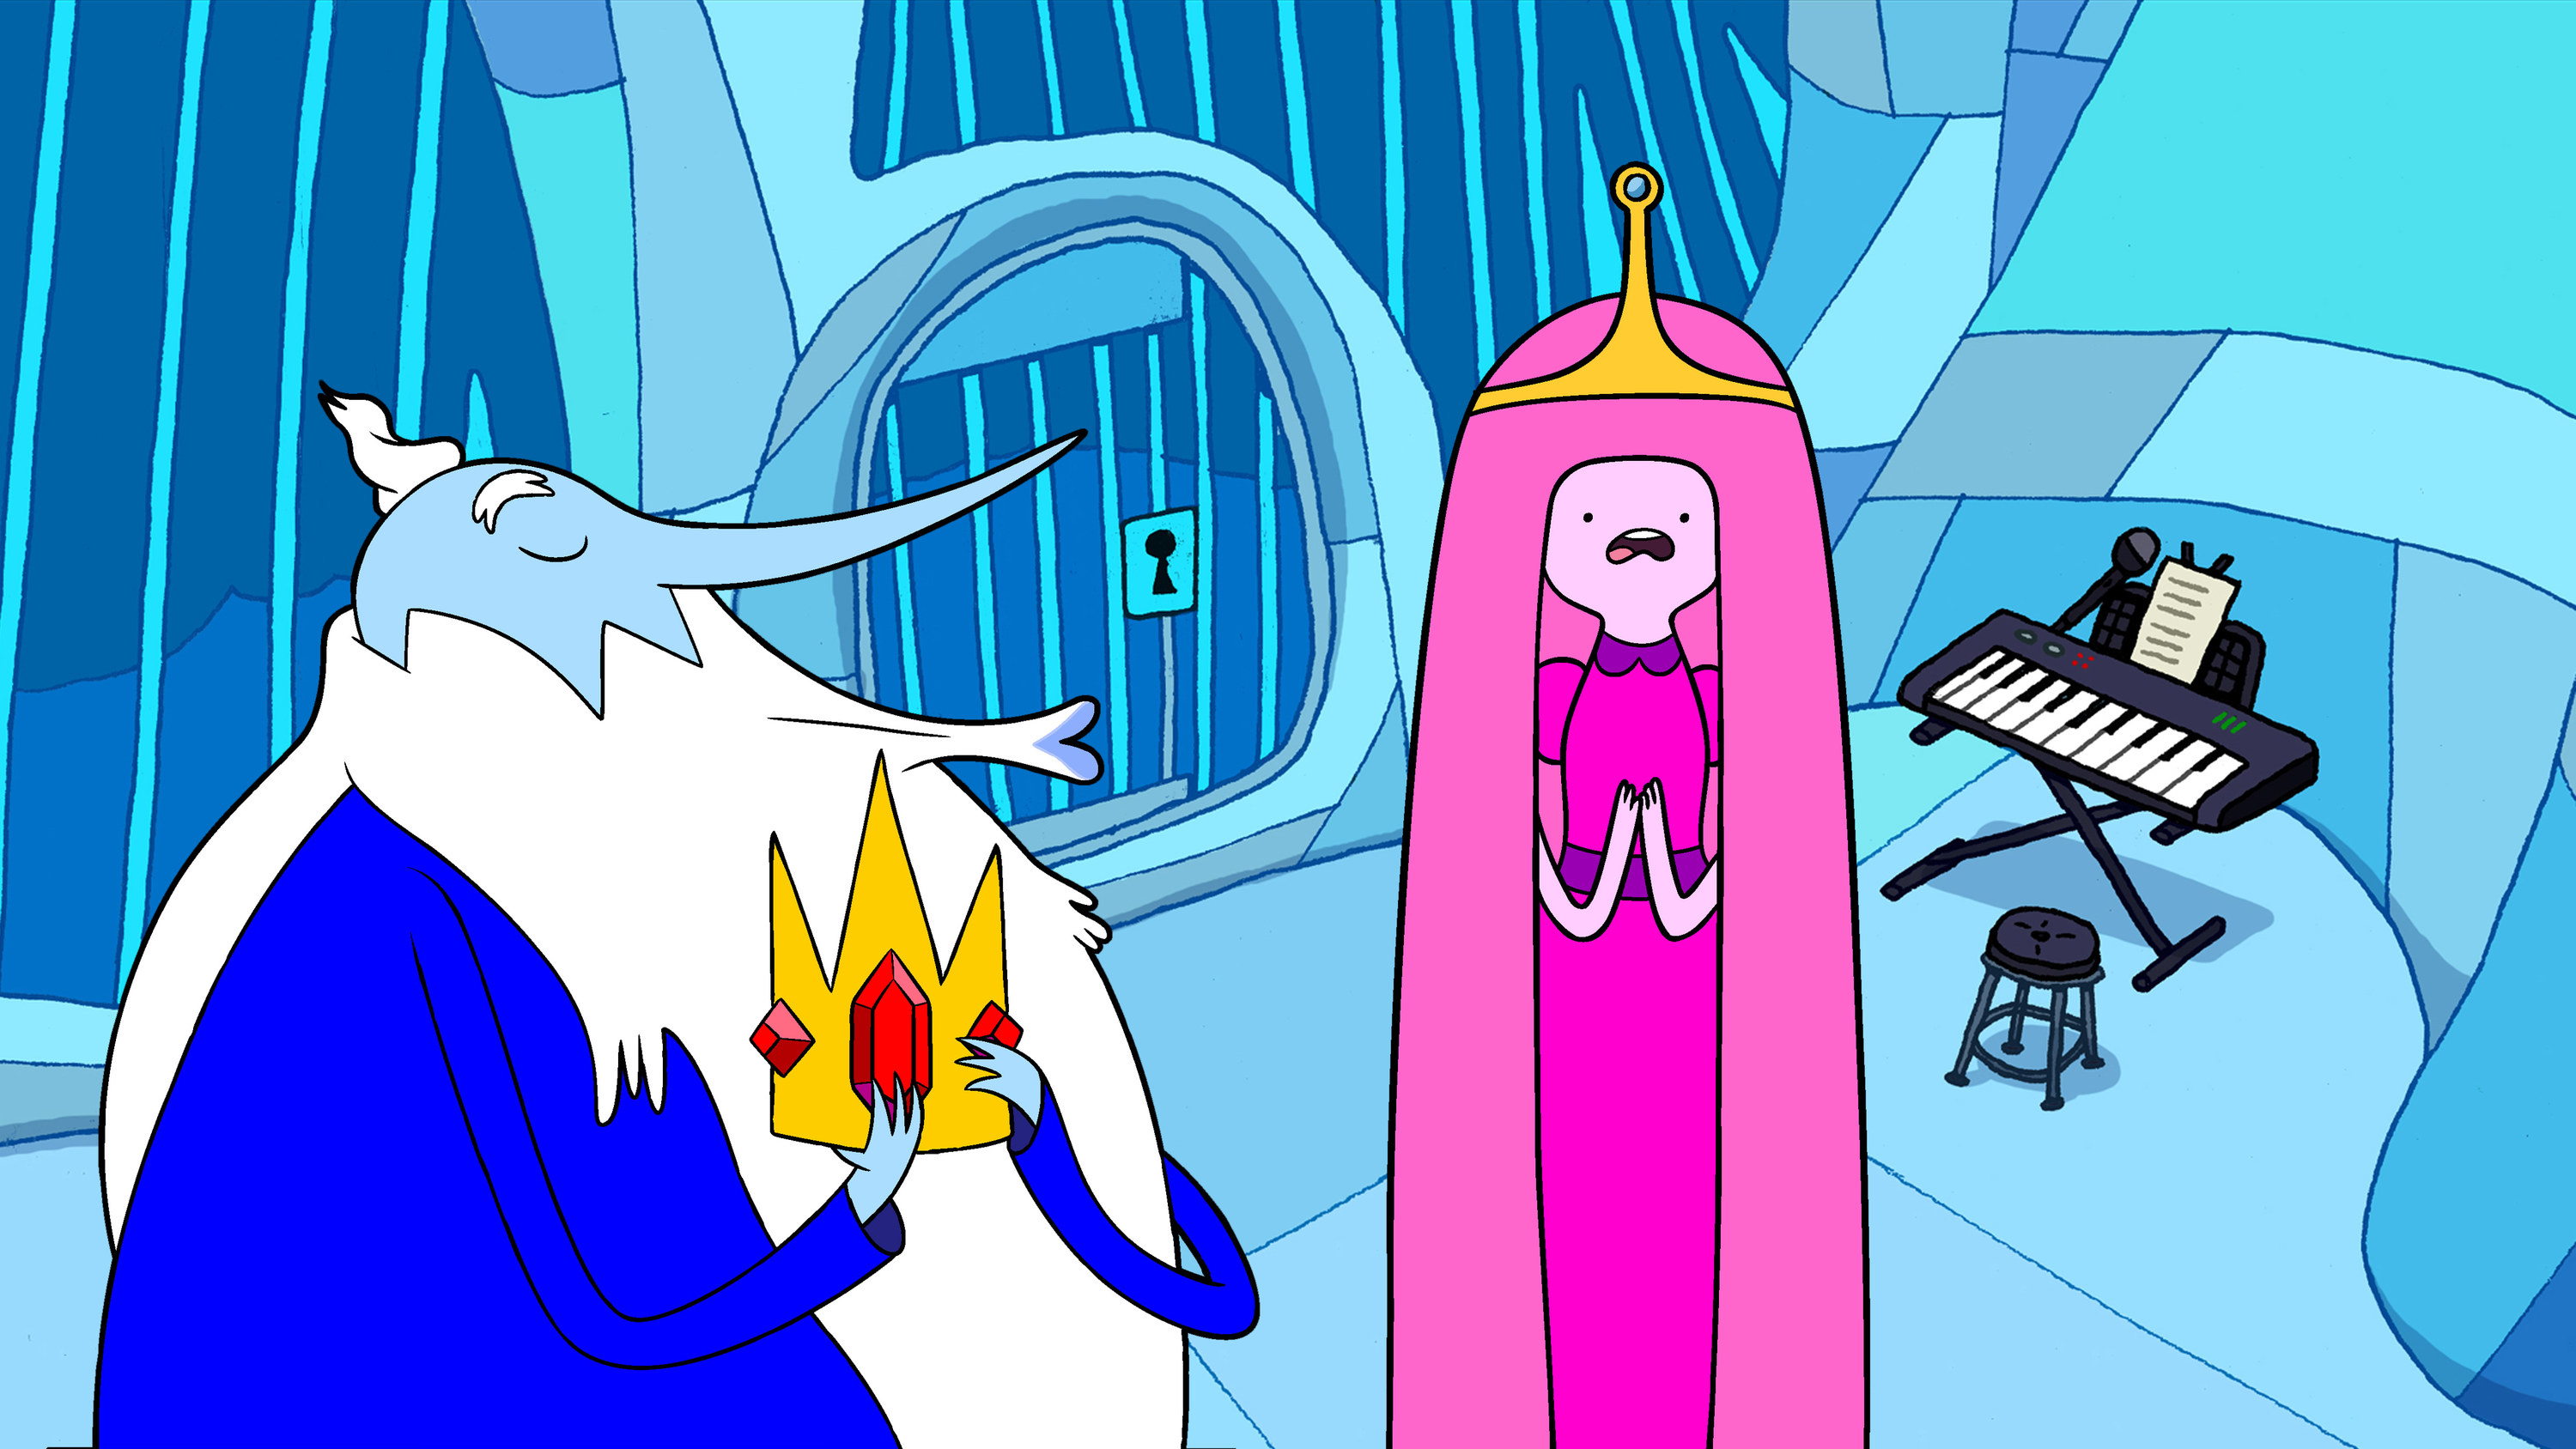 Ice King looks like he wants to kiss Princess Bubblegum, who looks grossed out